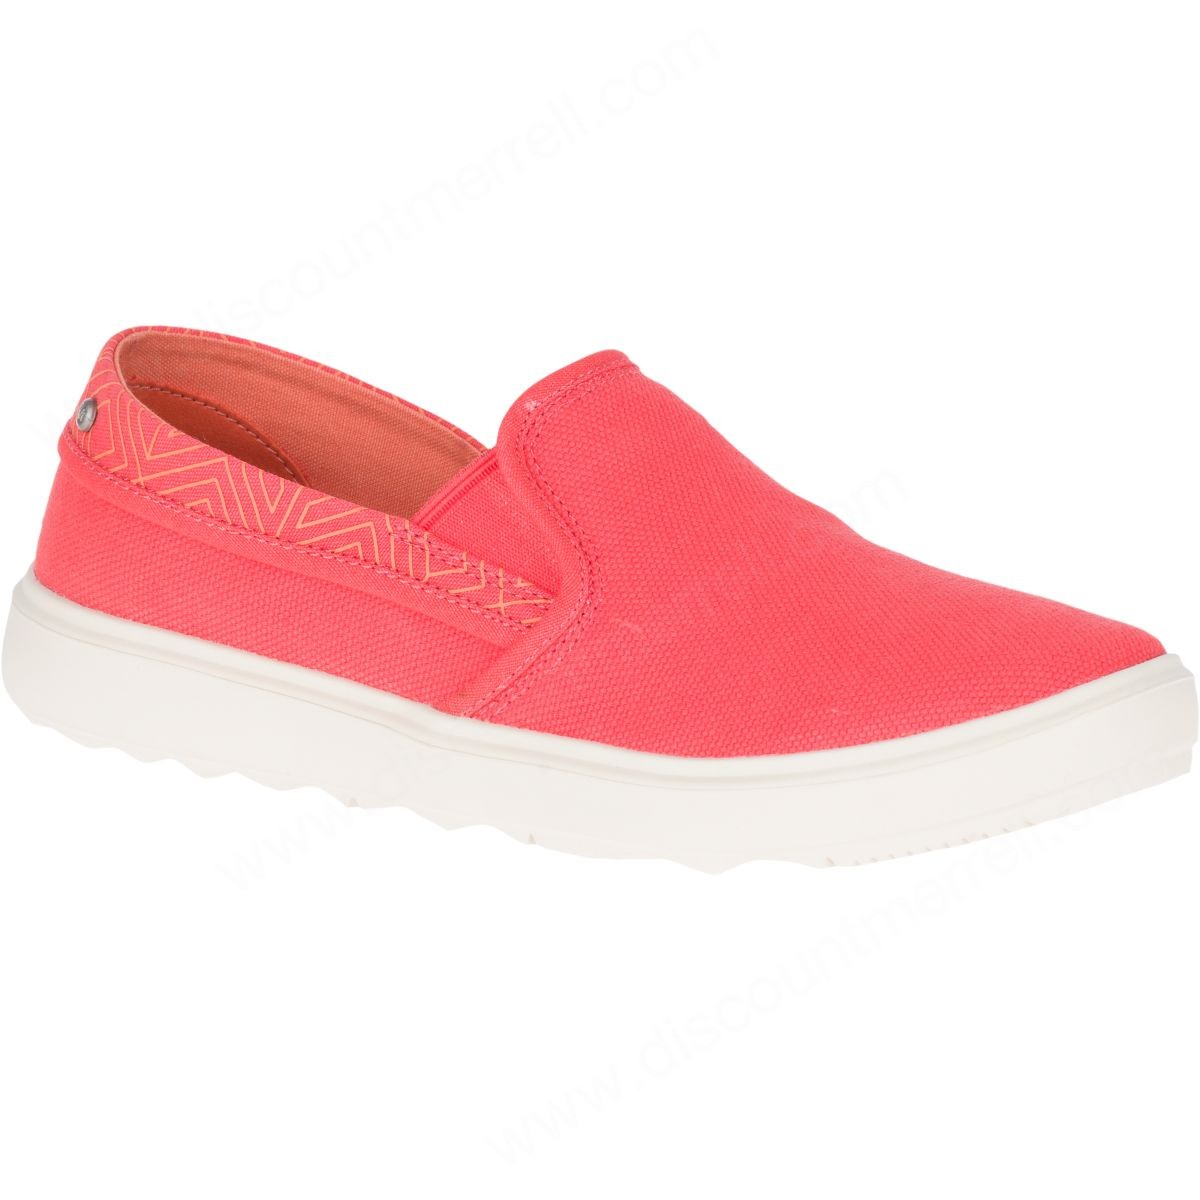 Merrell Woman's Around Town City Moc Canvas Hot Coral - Merrell Woman's Around Town City Moc Canvas Hot Coral